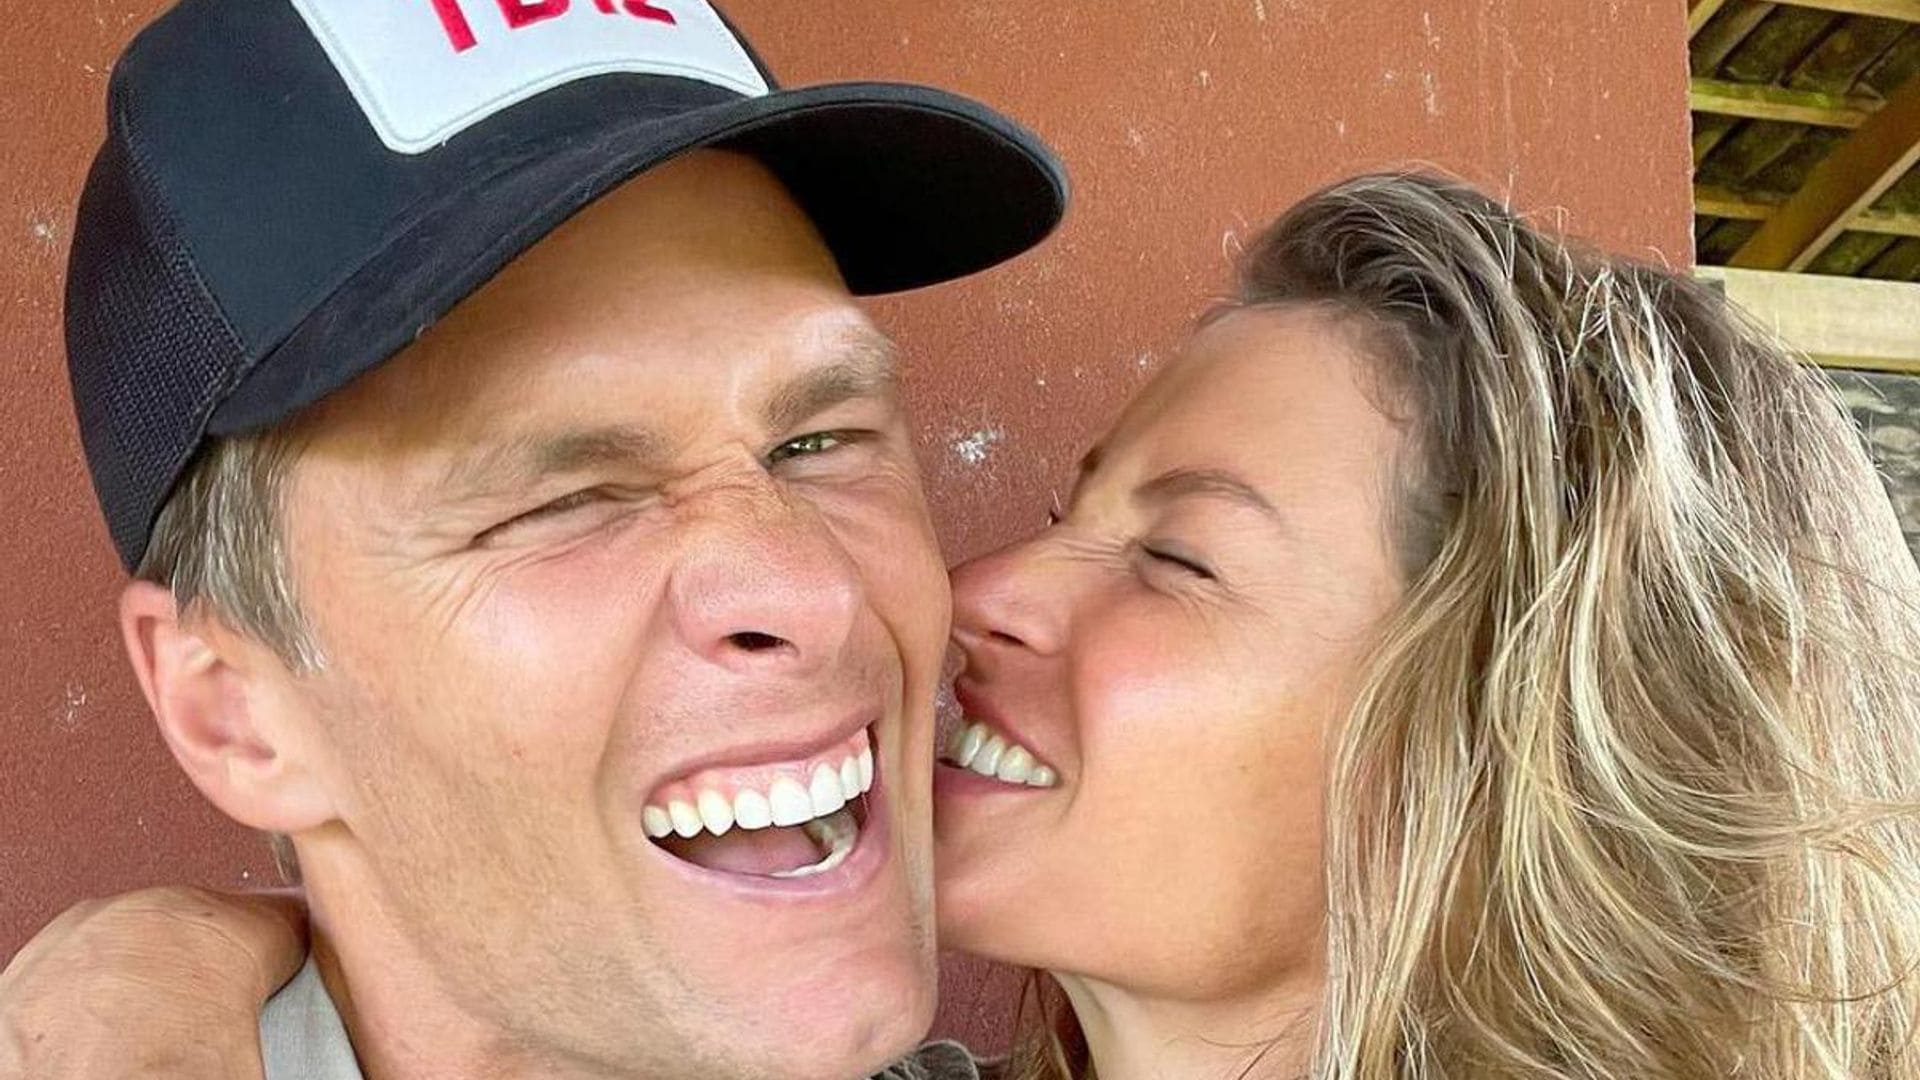 Gisele Bündchen and Tom Brady gave each other the sweetest, sustainable Valentine’s Day gifts